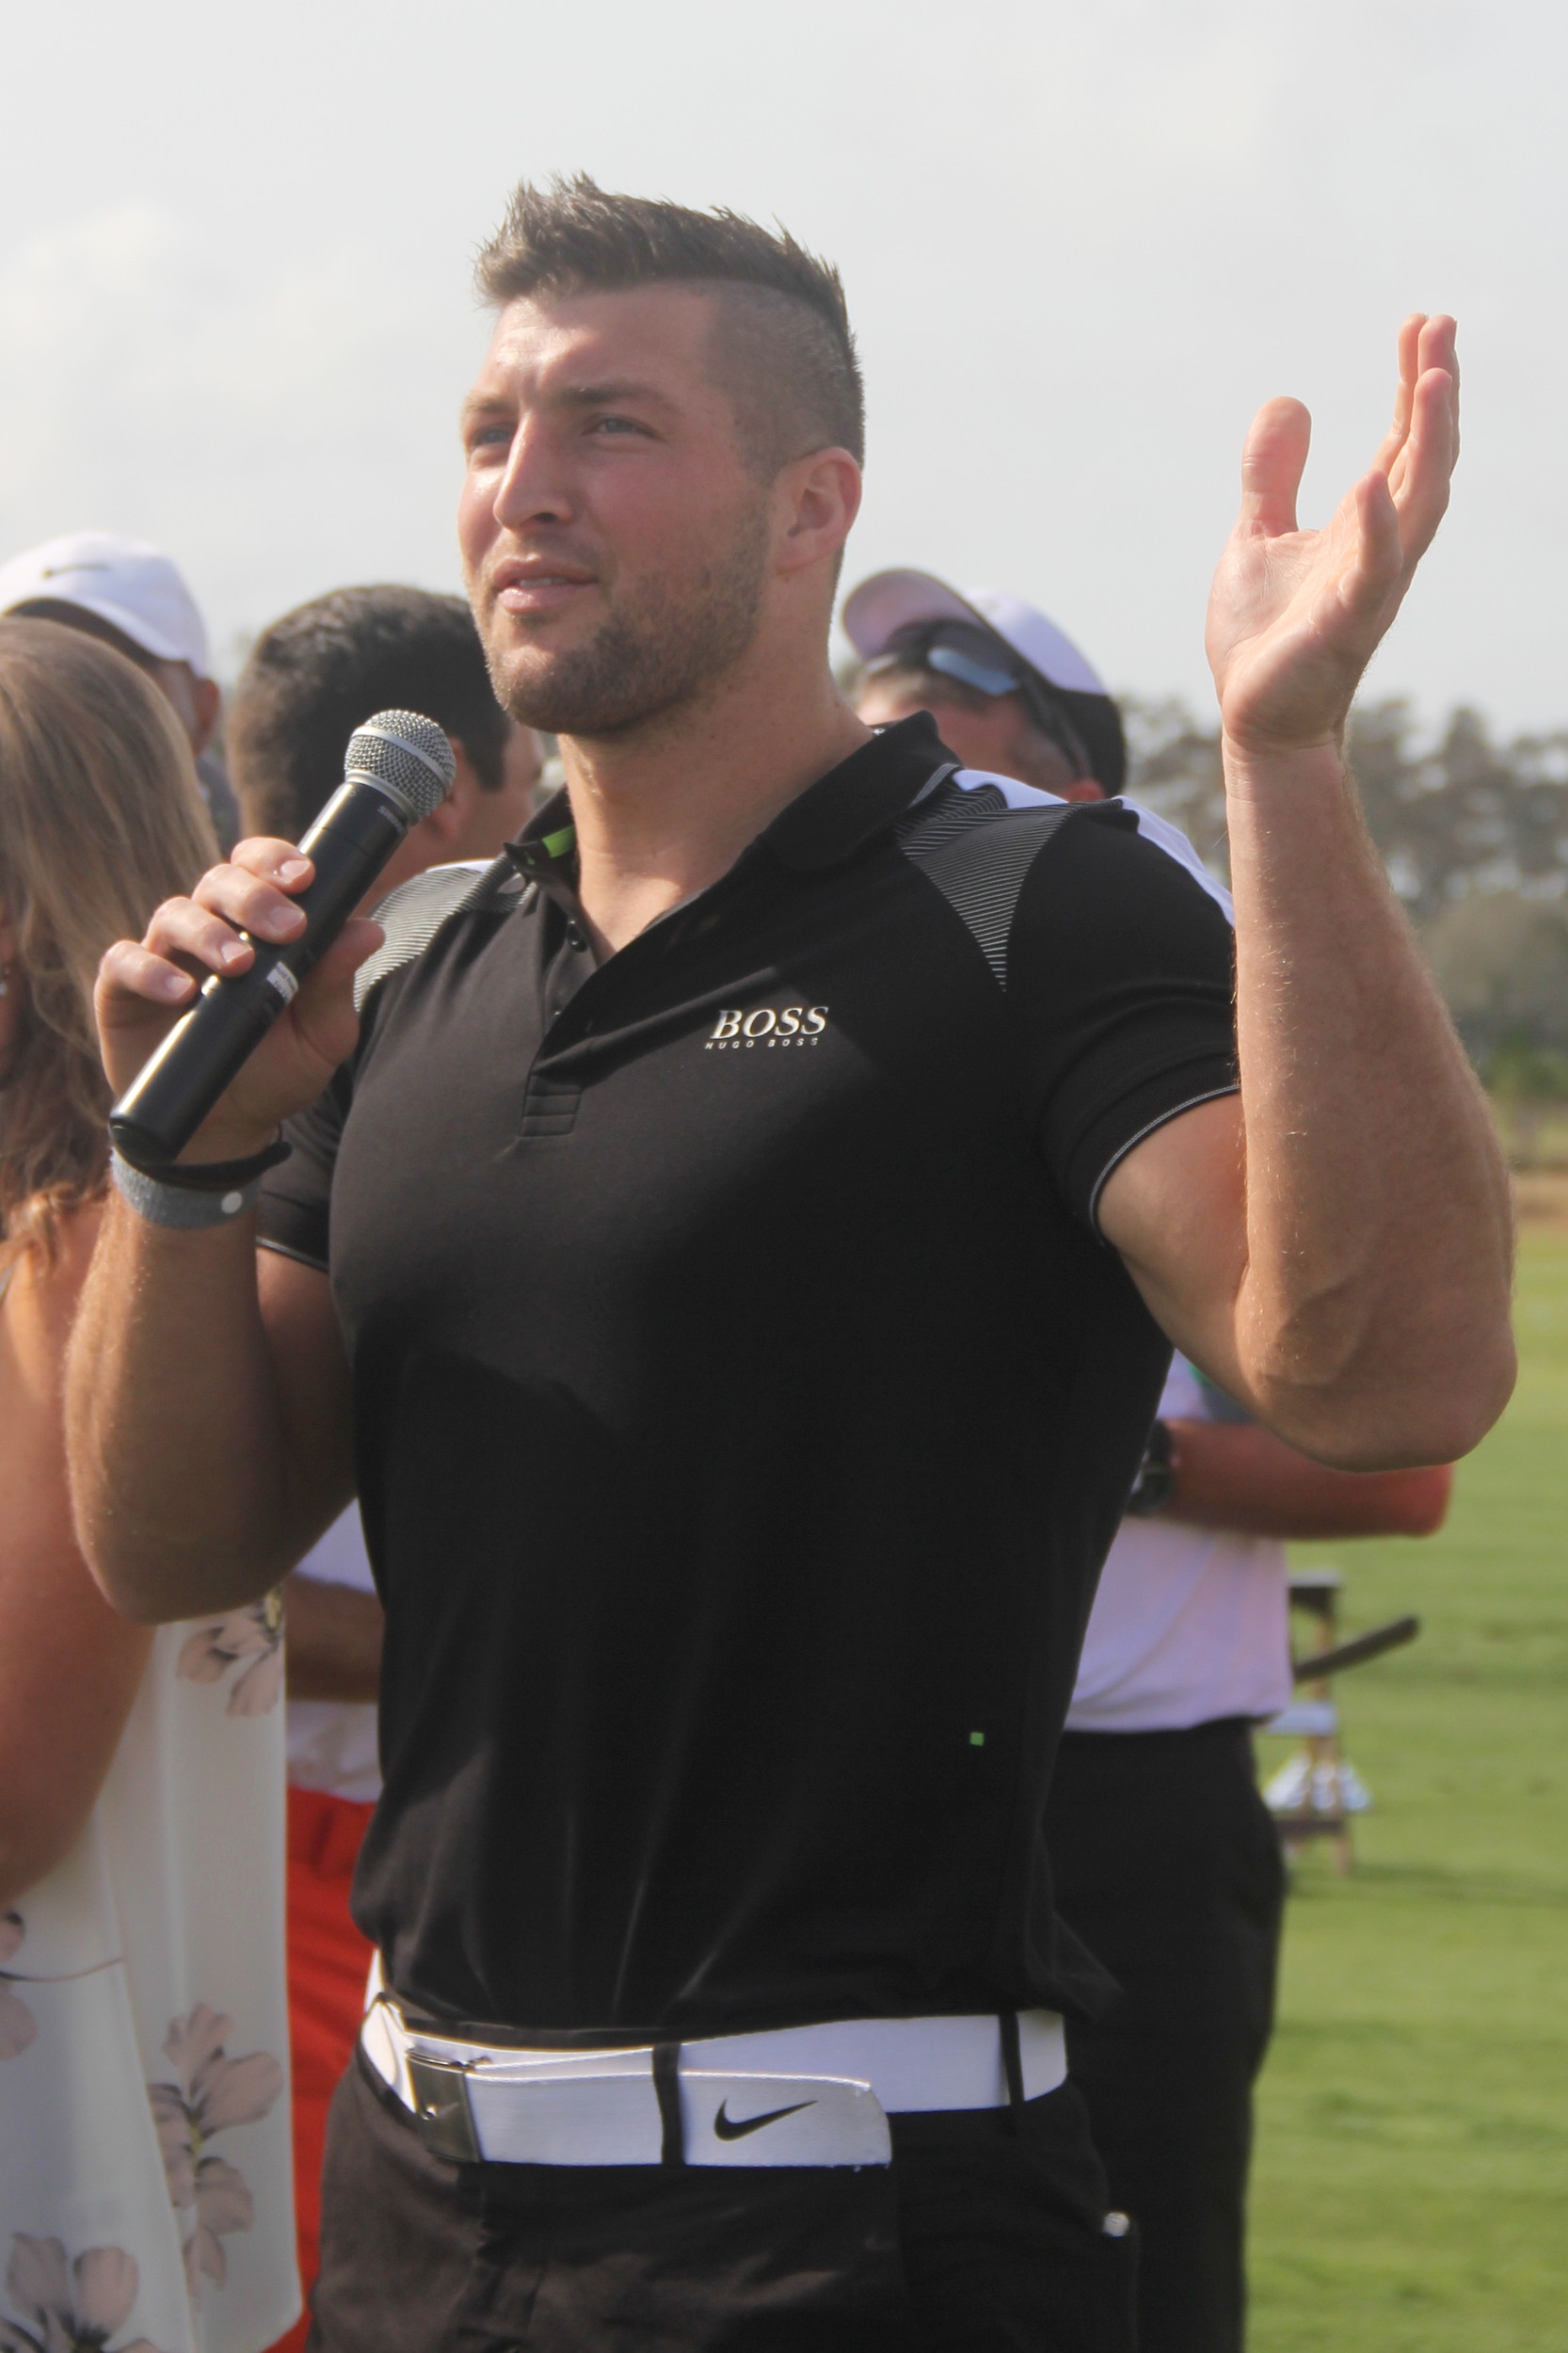 Tebow greets the crowd.